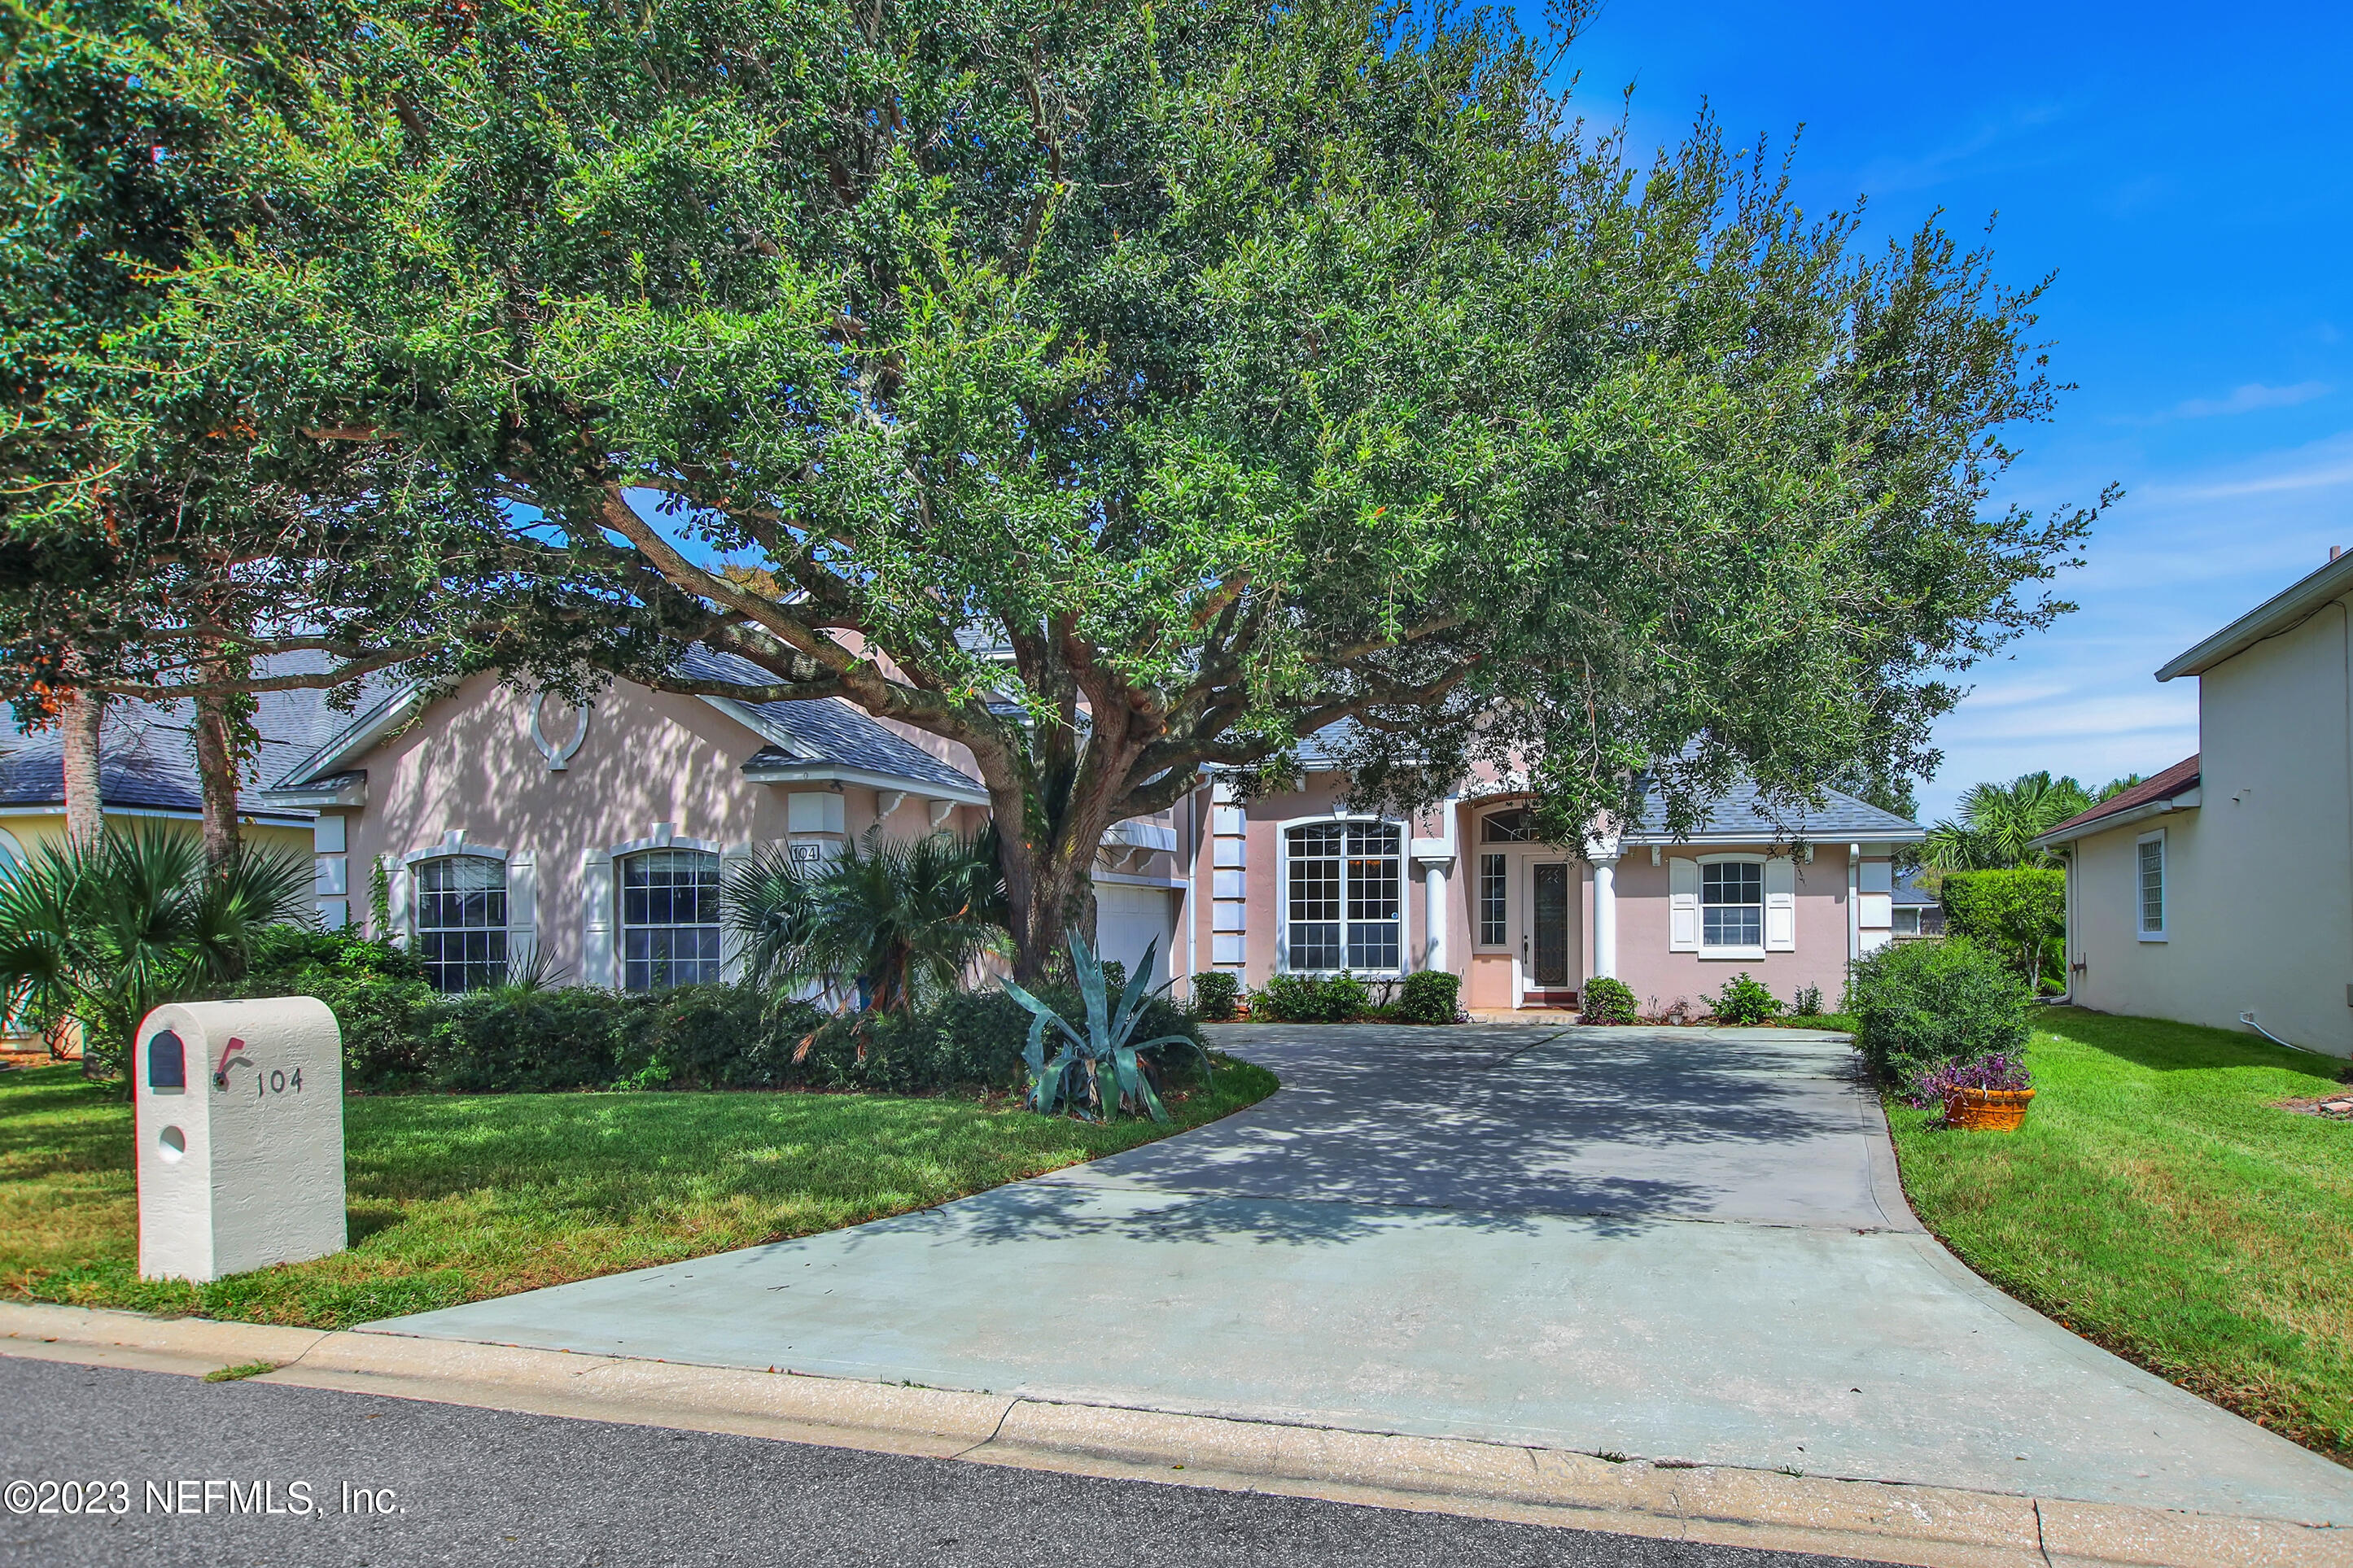 Ponte Vedra Beach, FL home for sale located at 104 Sea Lily Lane, Ponte Vedra Beach, FL 32082